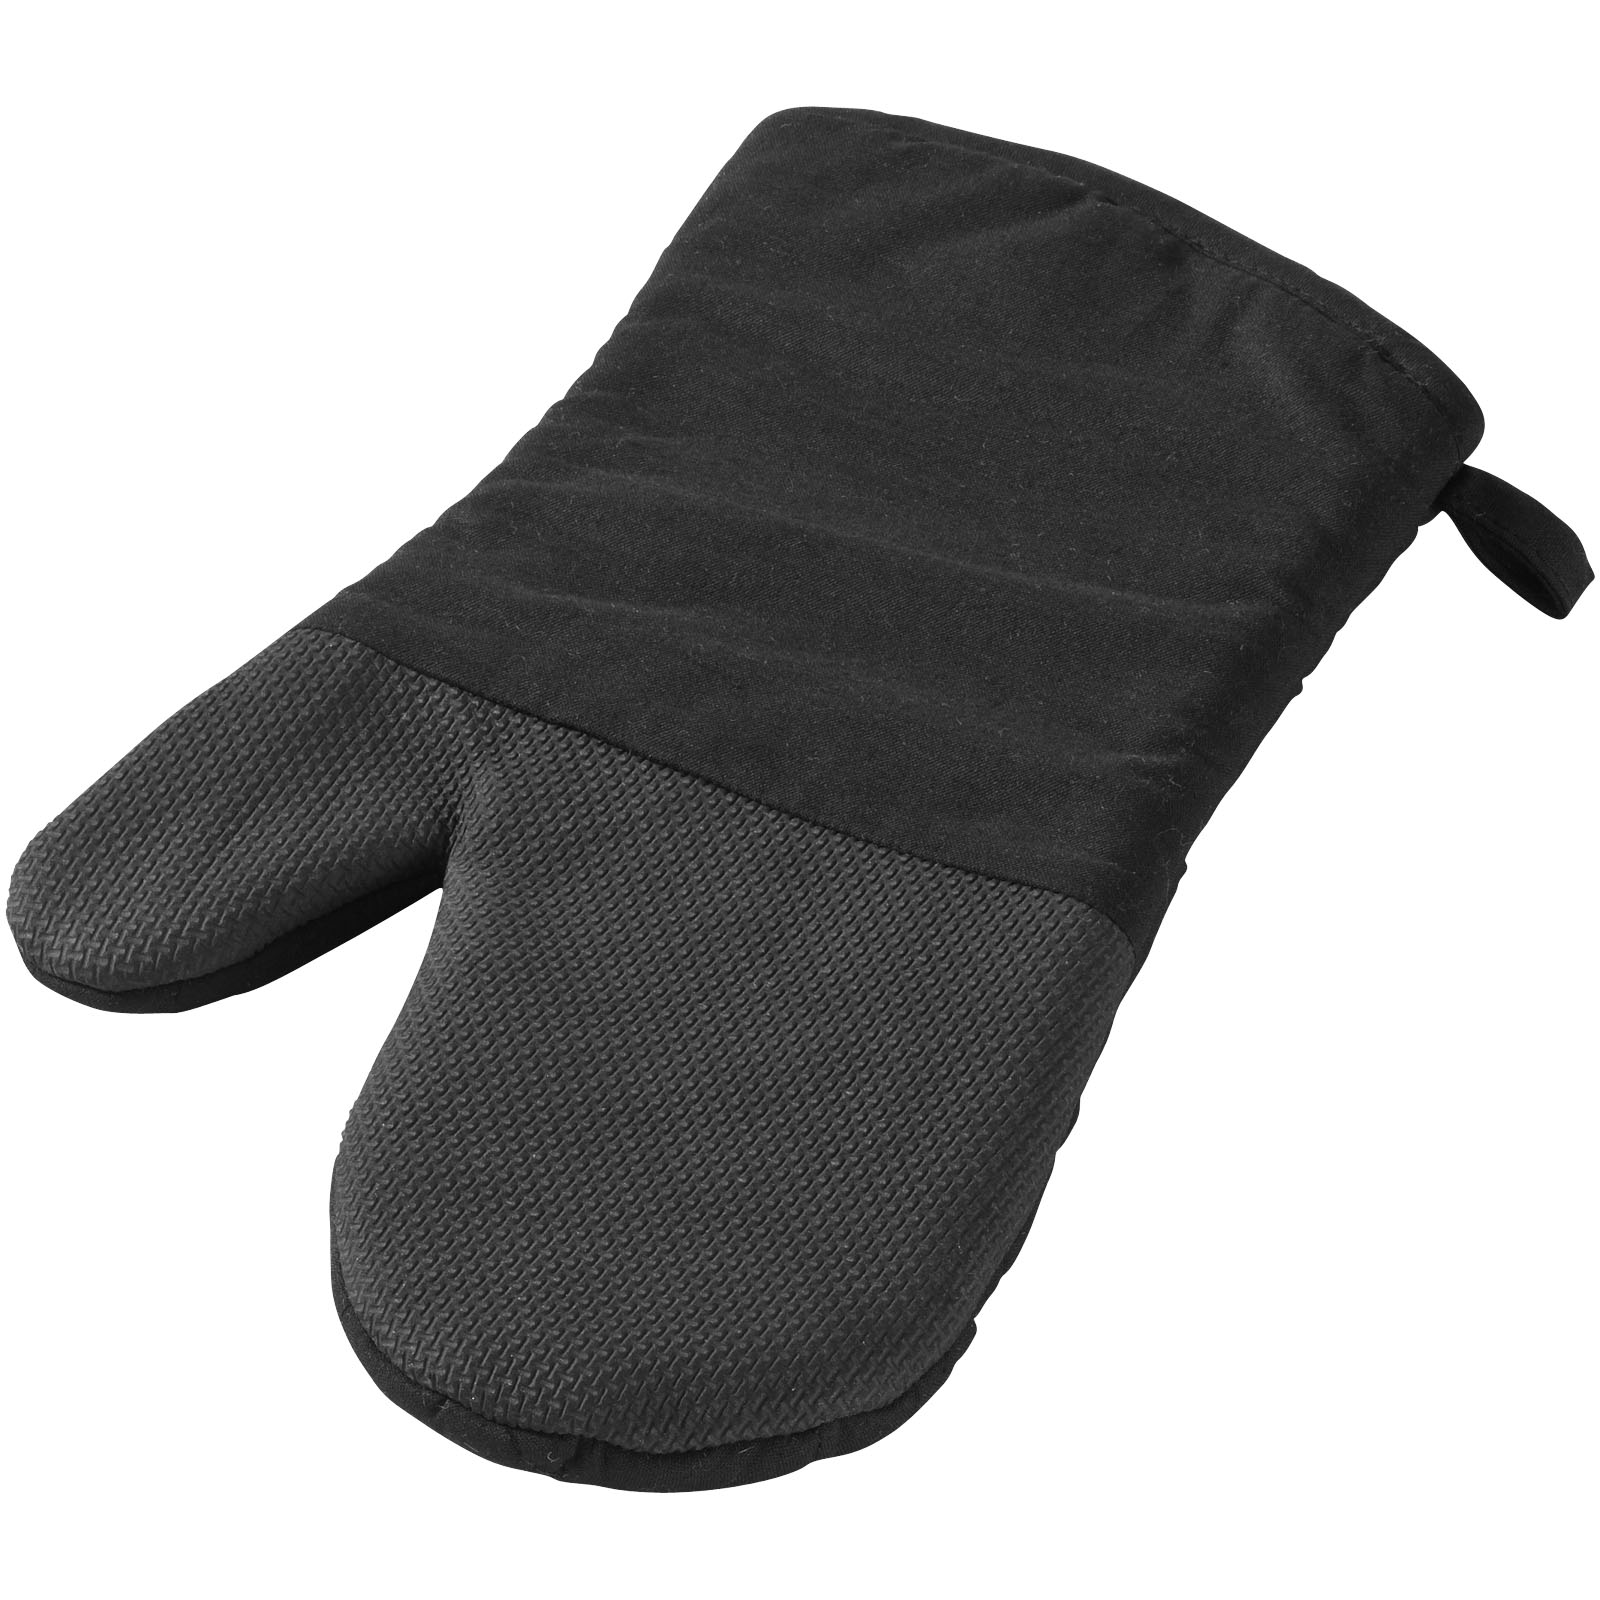 Home & Kitchen - Maya oven gloves with silicone grip